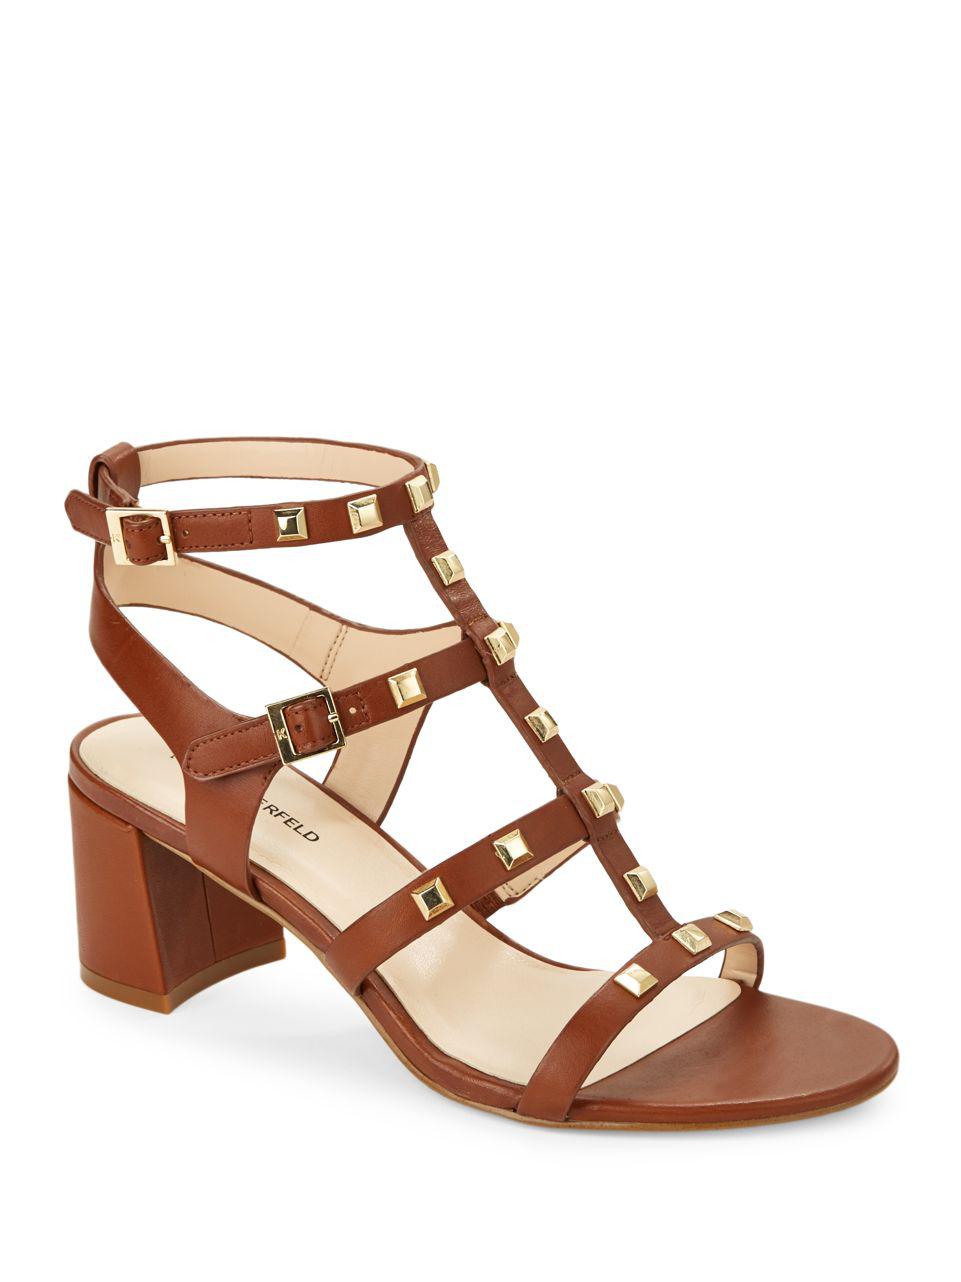 Karl Lagerfeld Honore Studded Leather Gladiator Sandals in Brown - Lyst